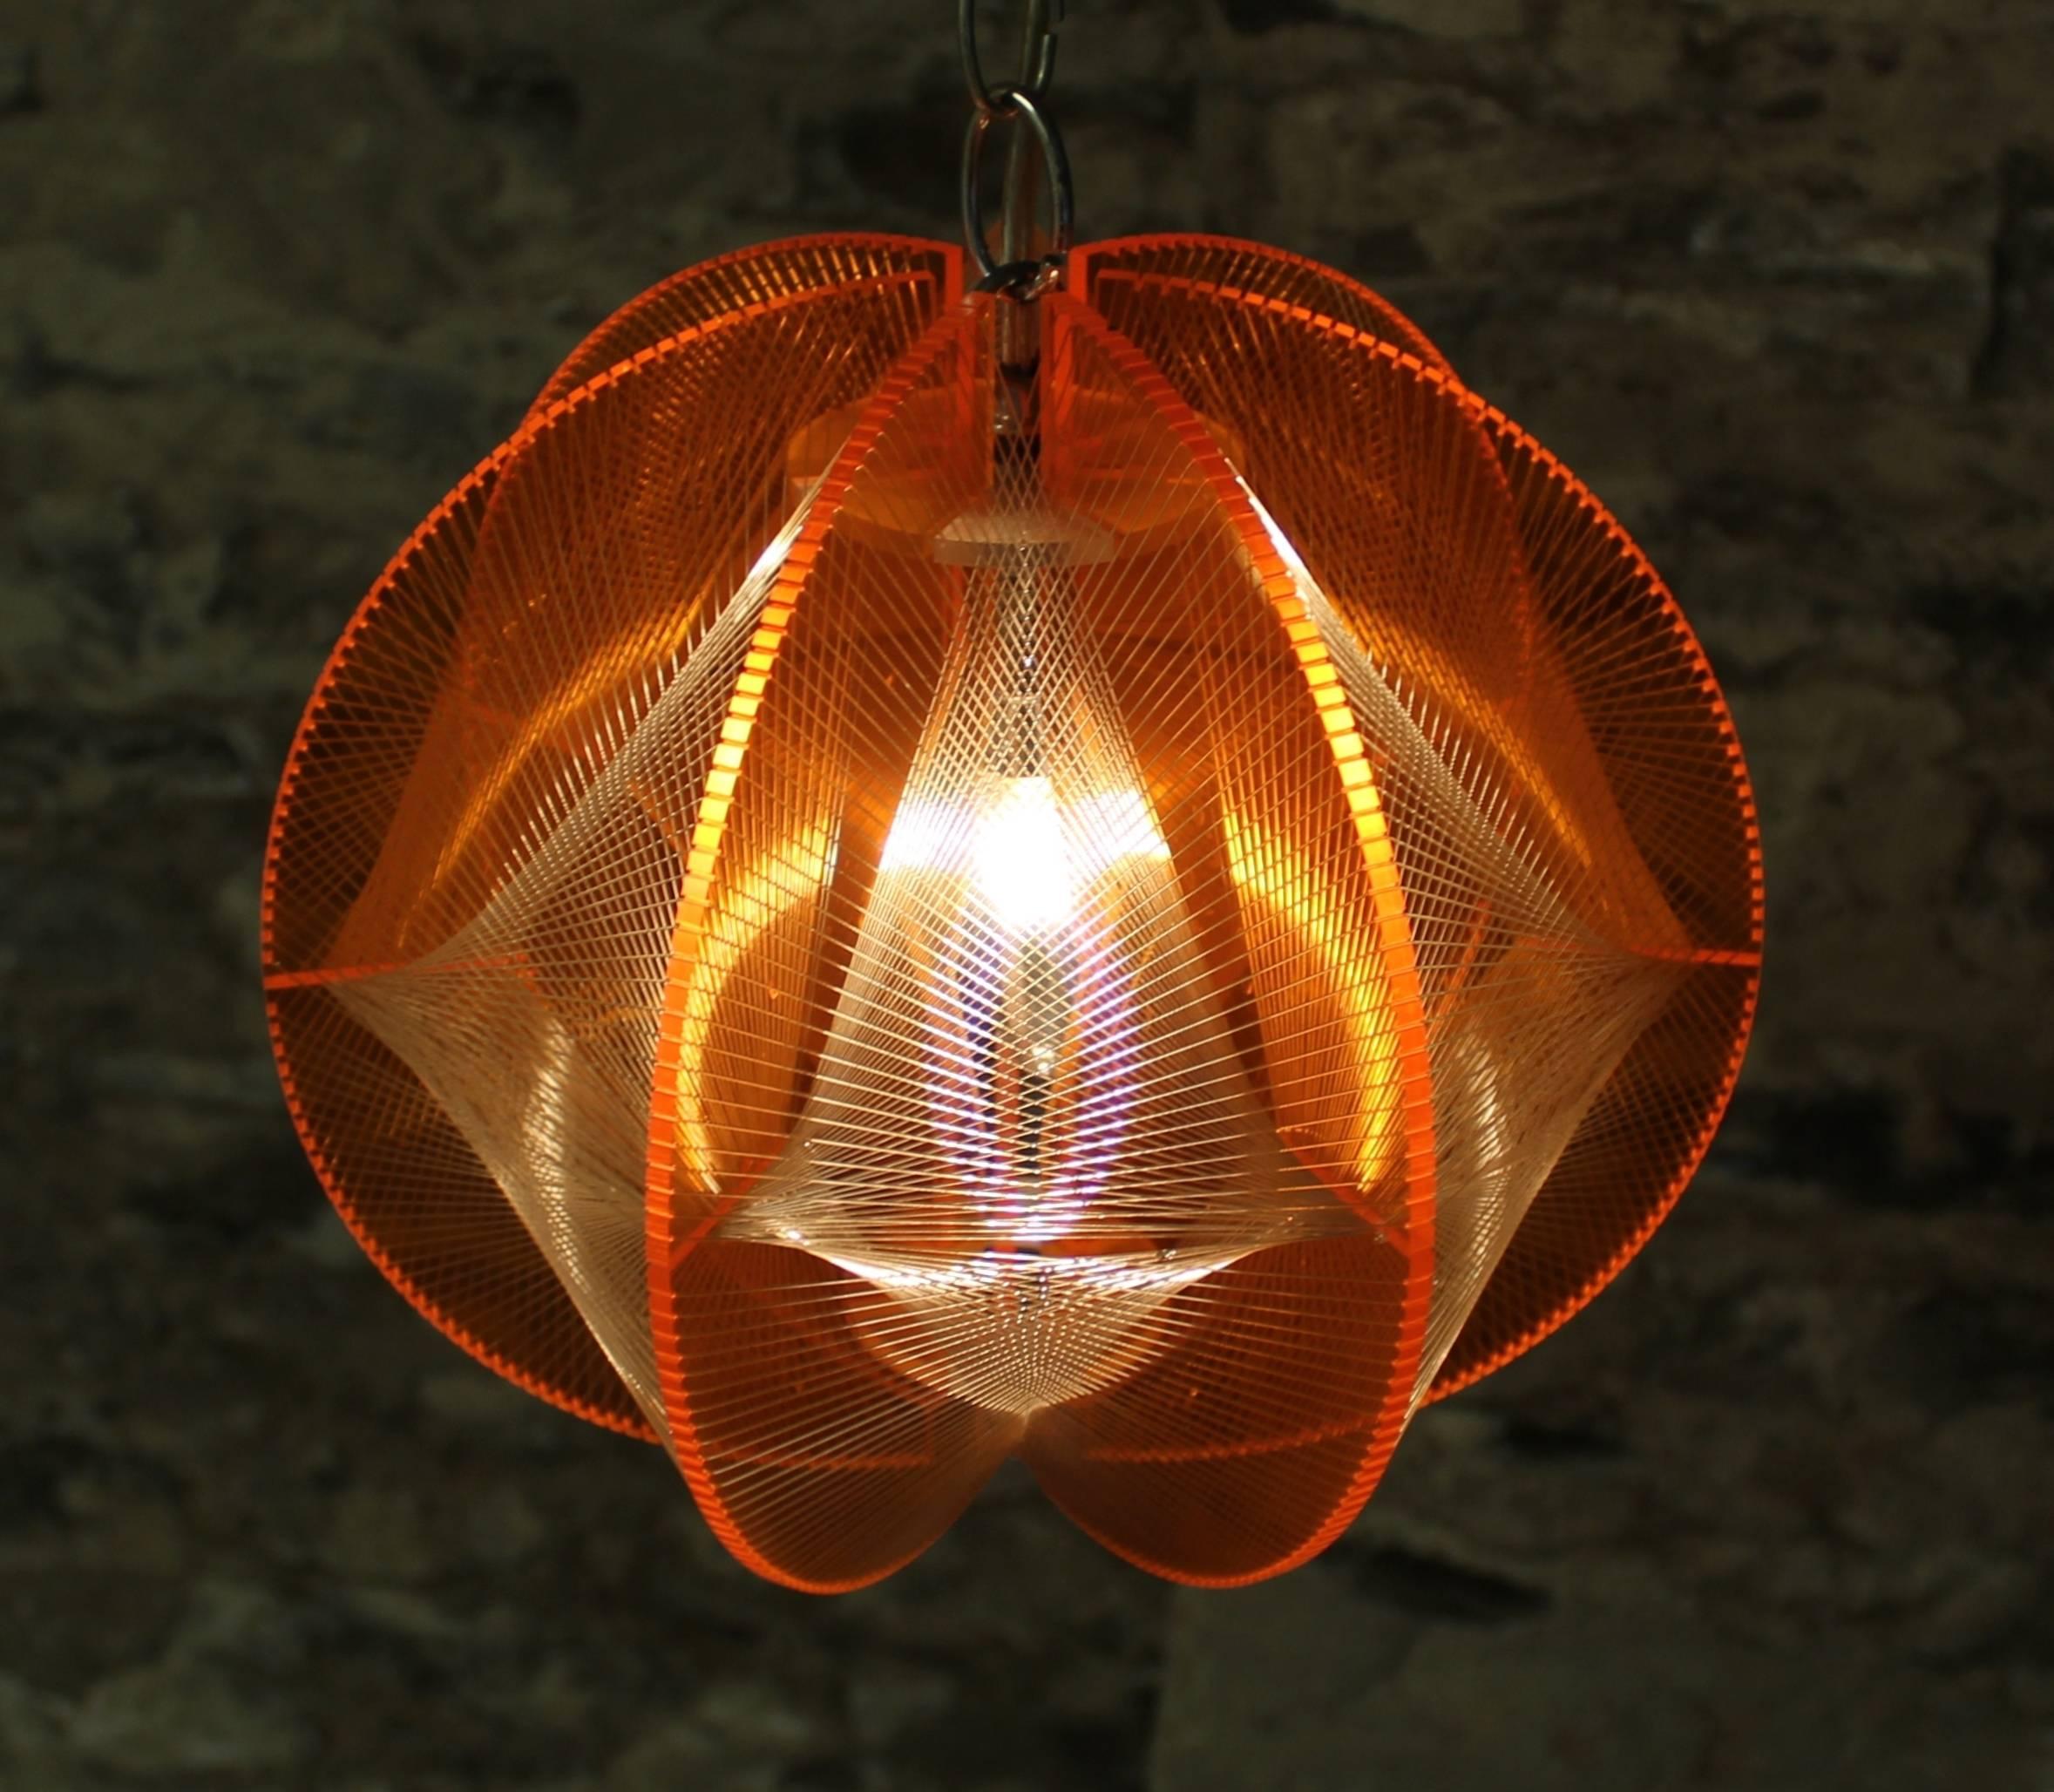 Mid-Century Modern Lucite geometric string light fixture or pendant.

Free shipping within the United States and Canada.